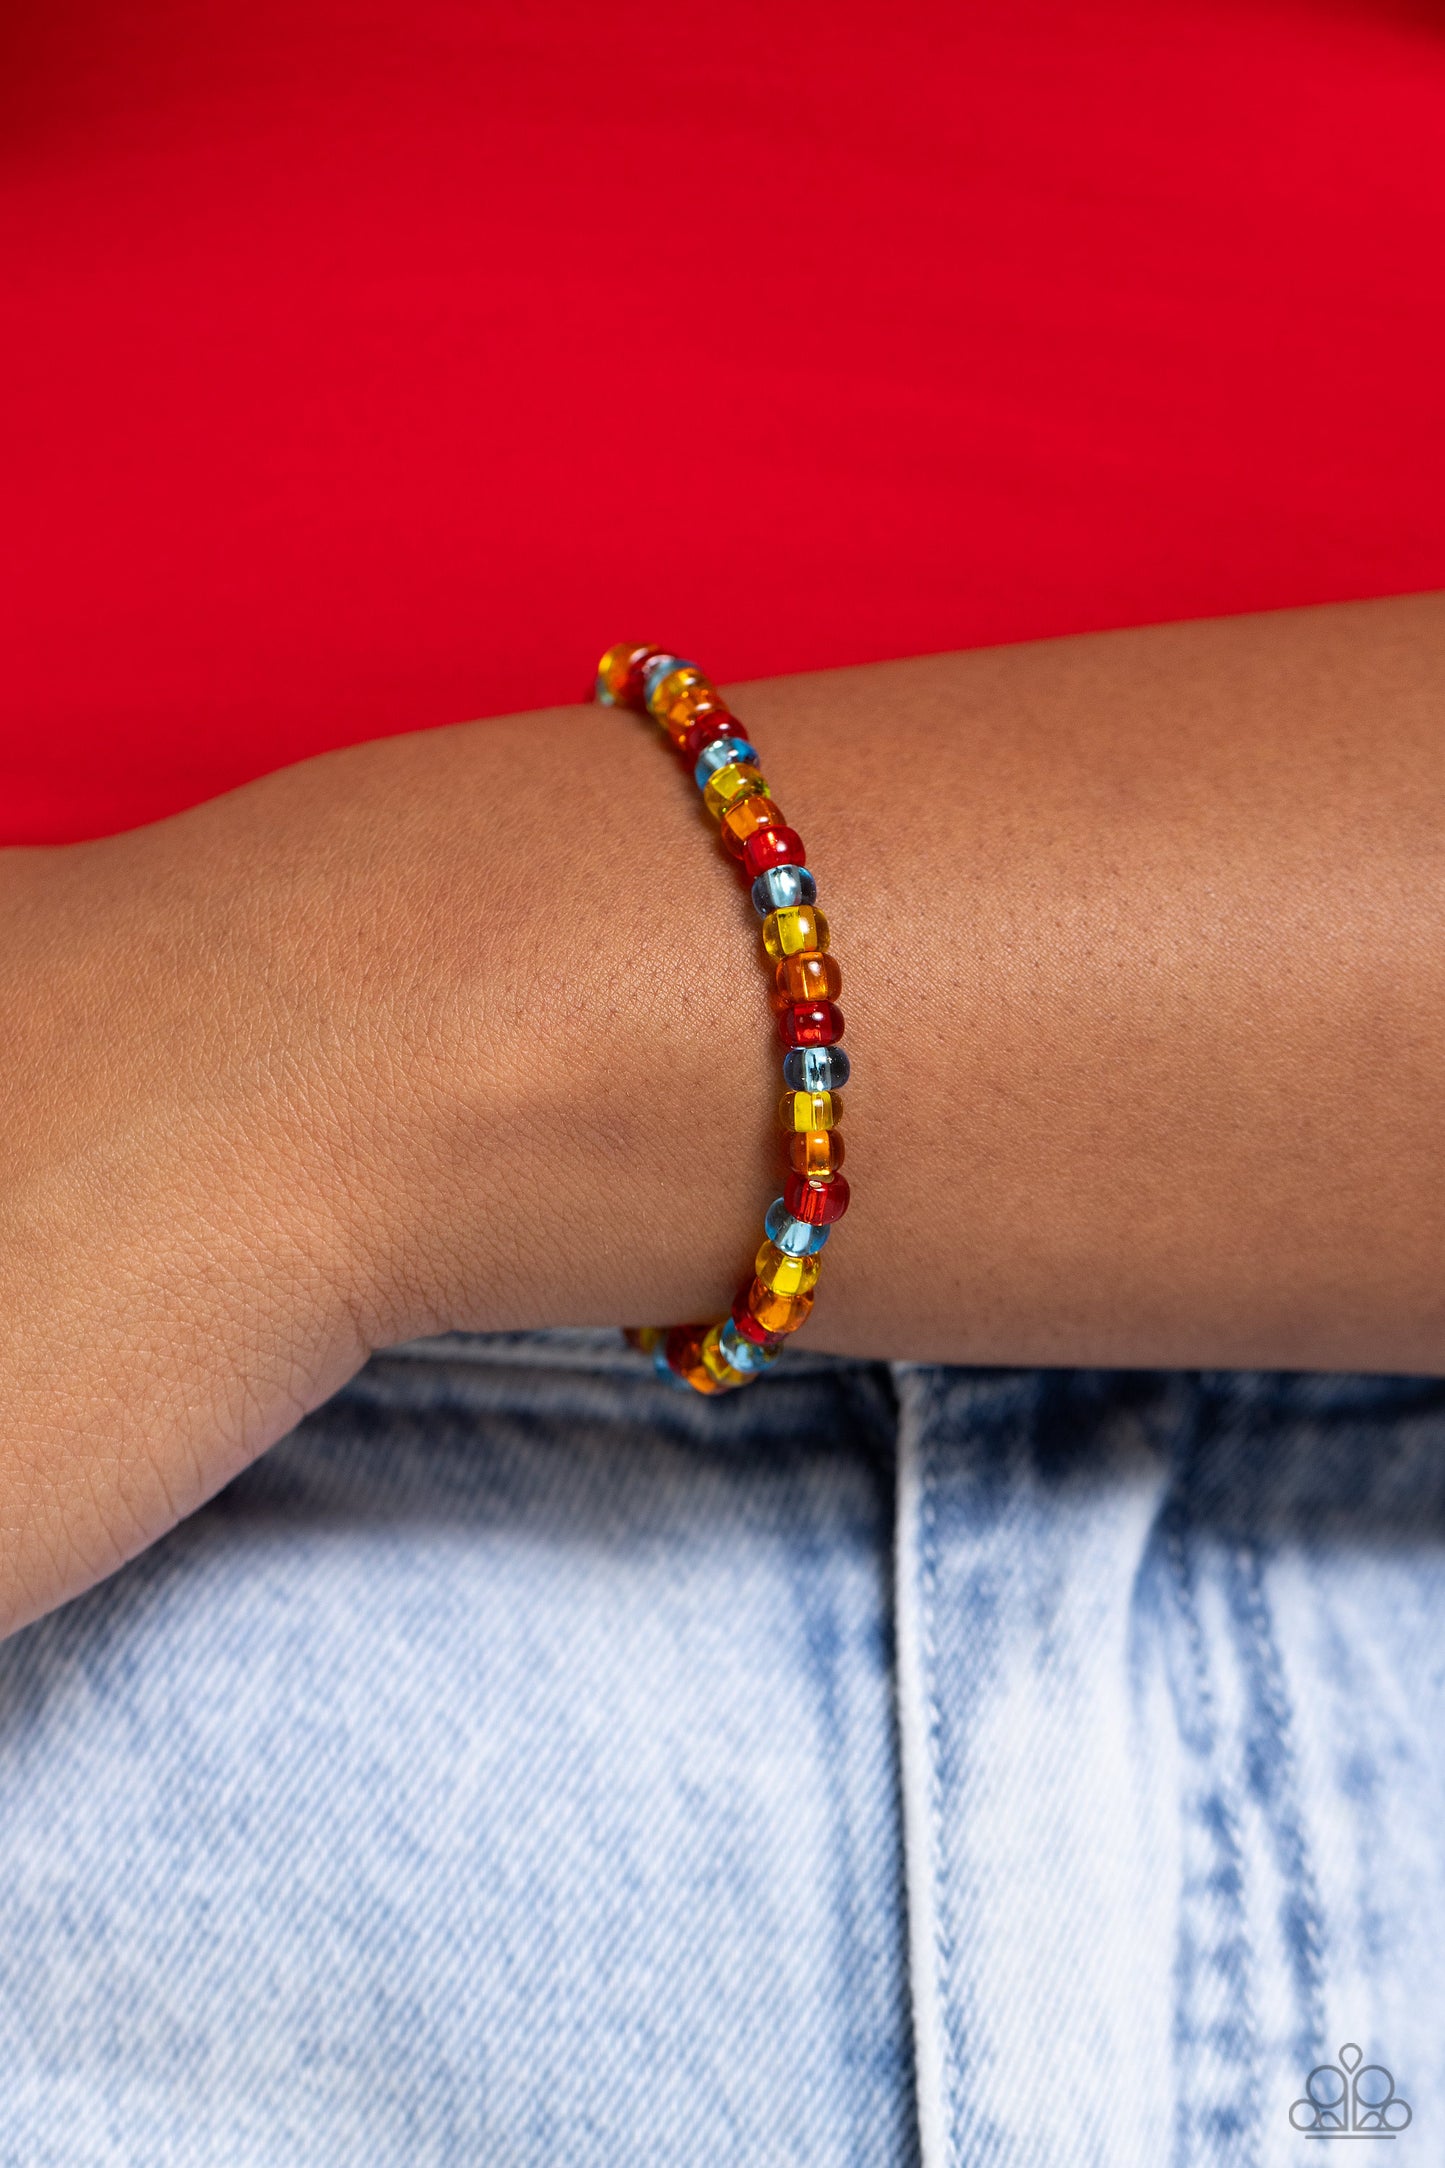 GLASS is in Session - Red Bracelet